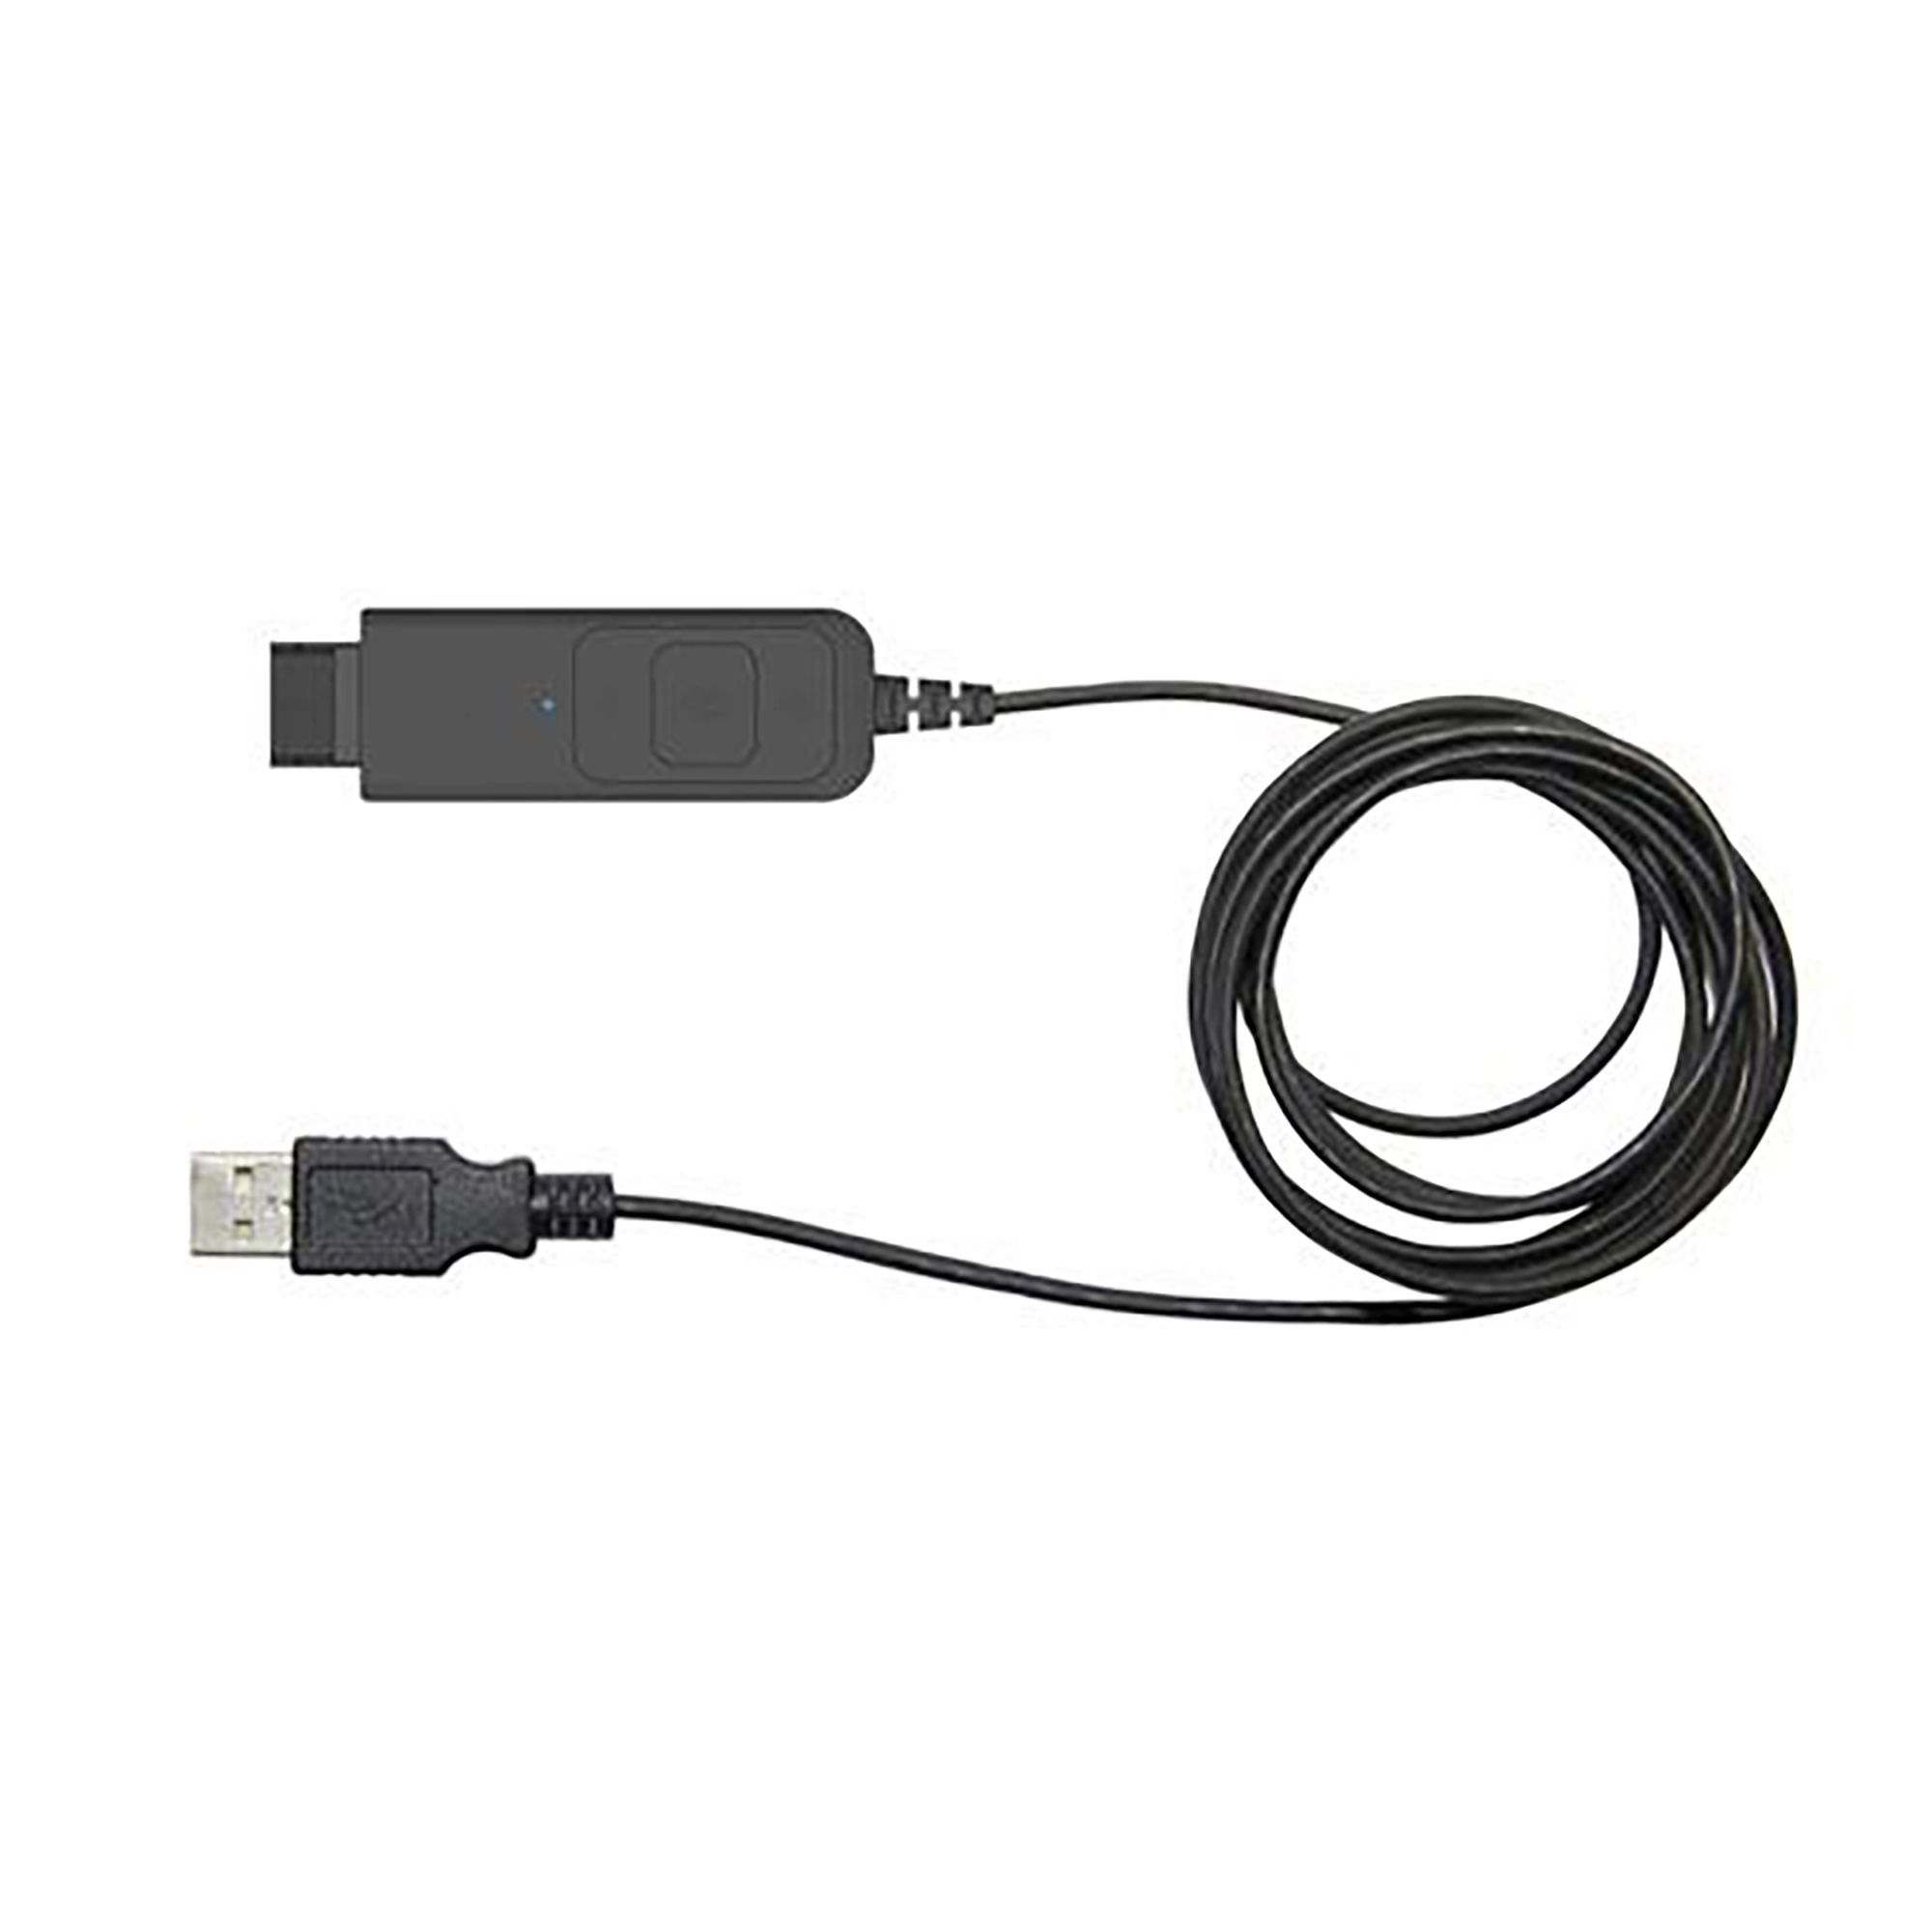 JPL BL-053 GN USB Headset Cable